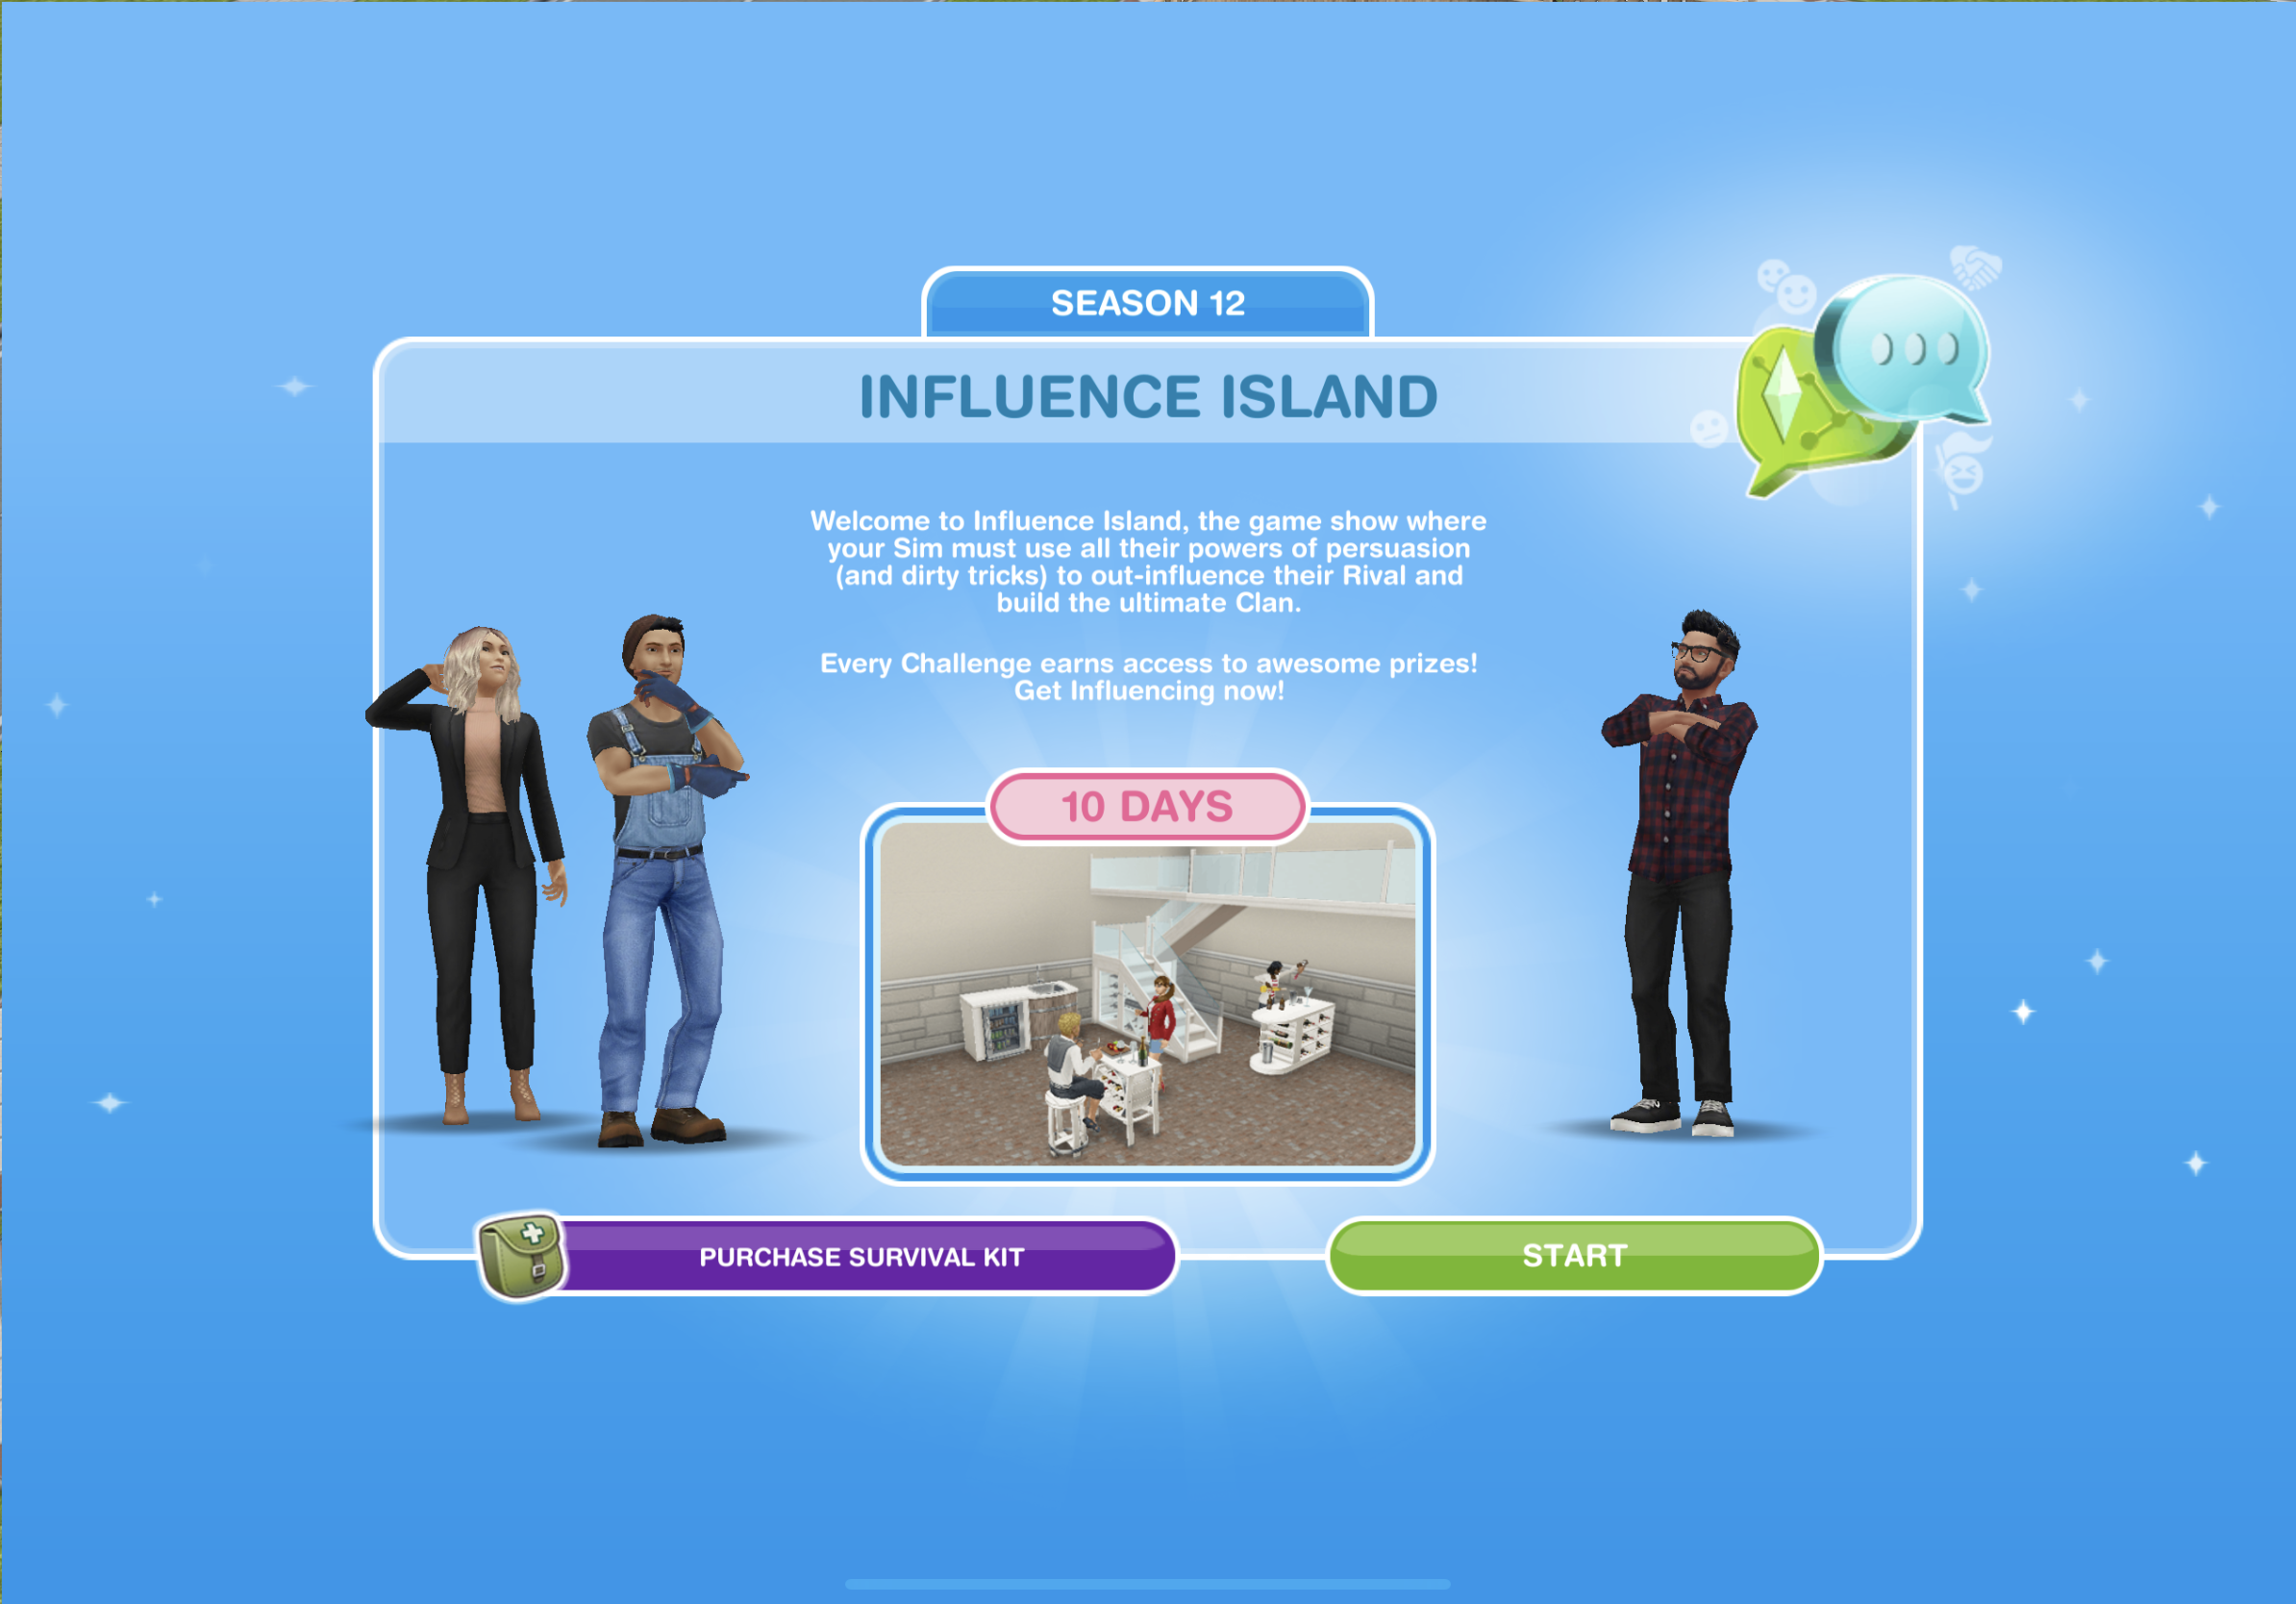 Social Points, The Sims Freeplay Wiki